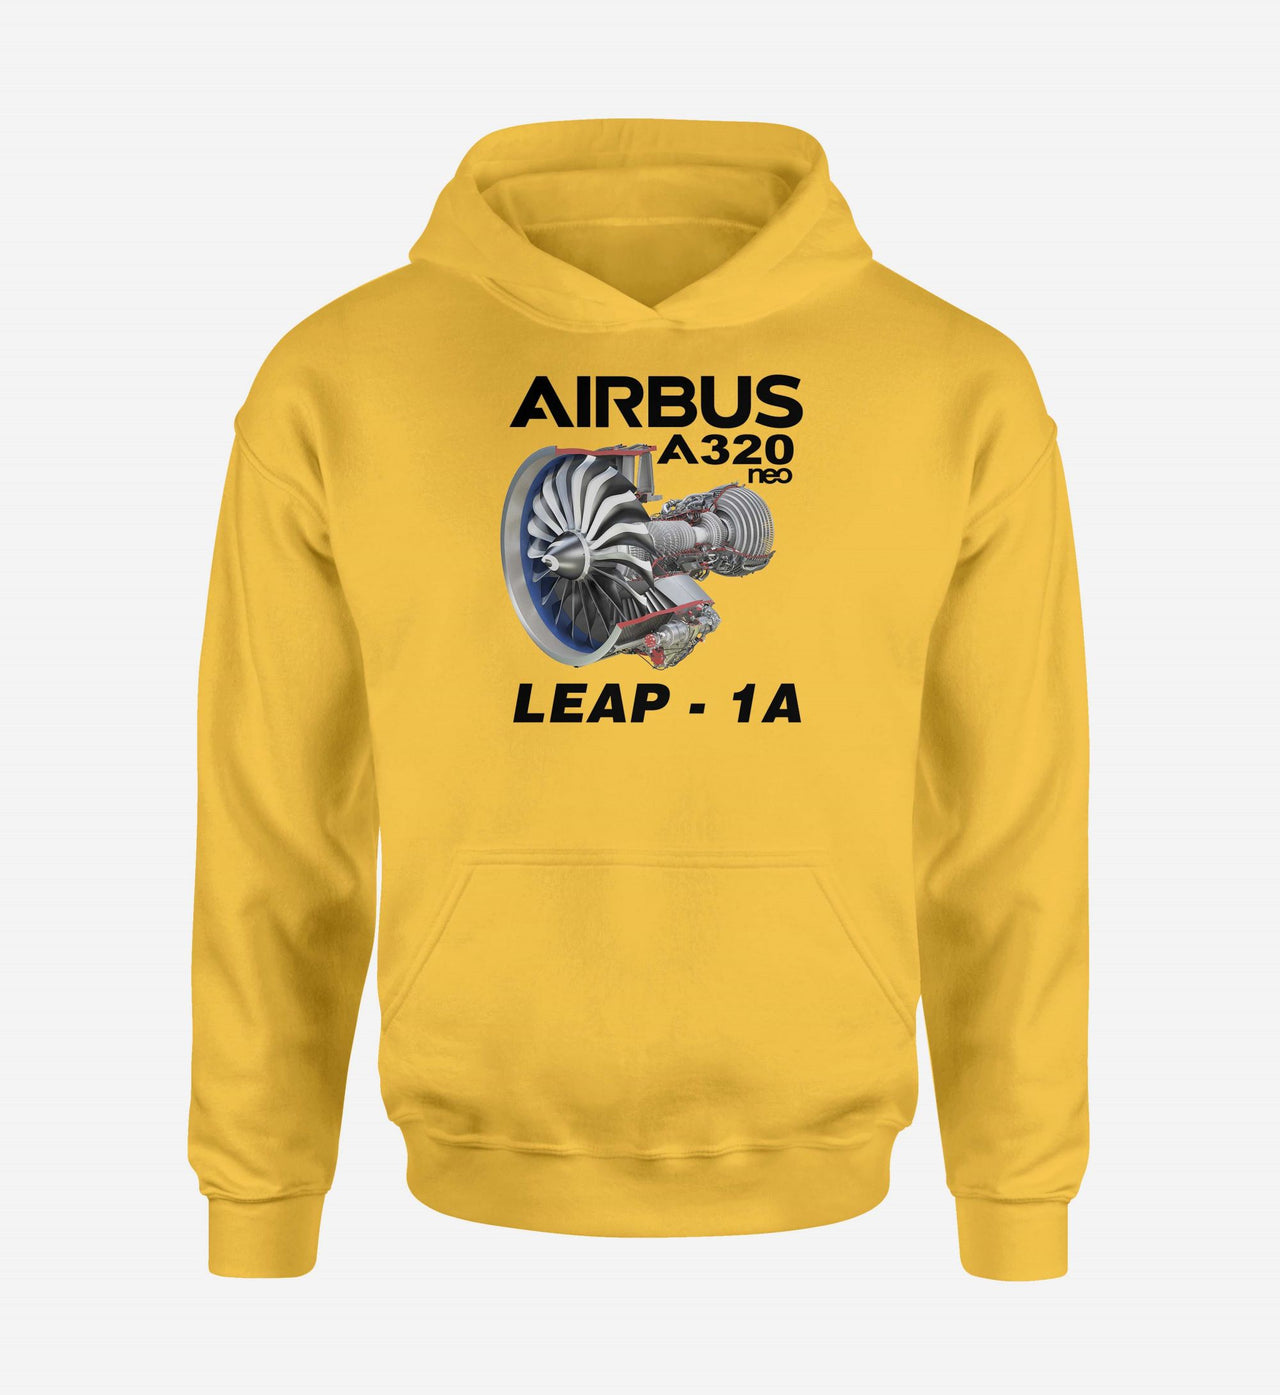 Airbus A320neo & Leap 1A Designed Hoodies